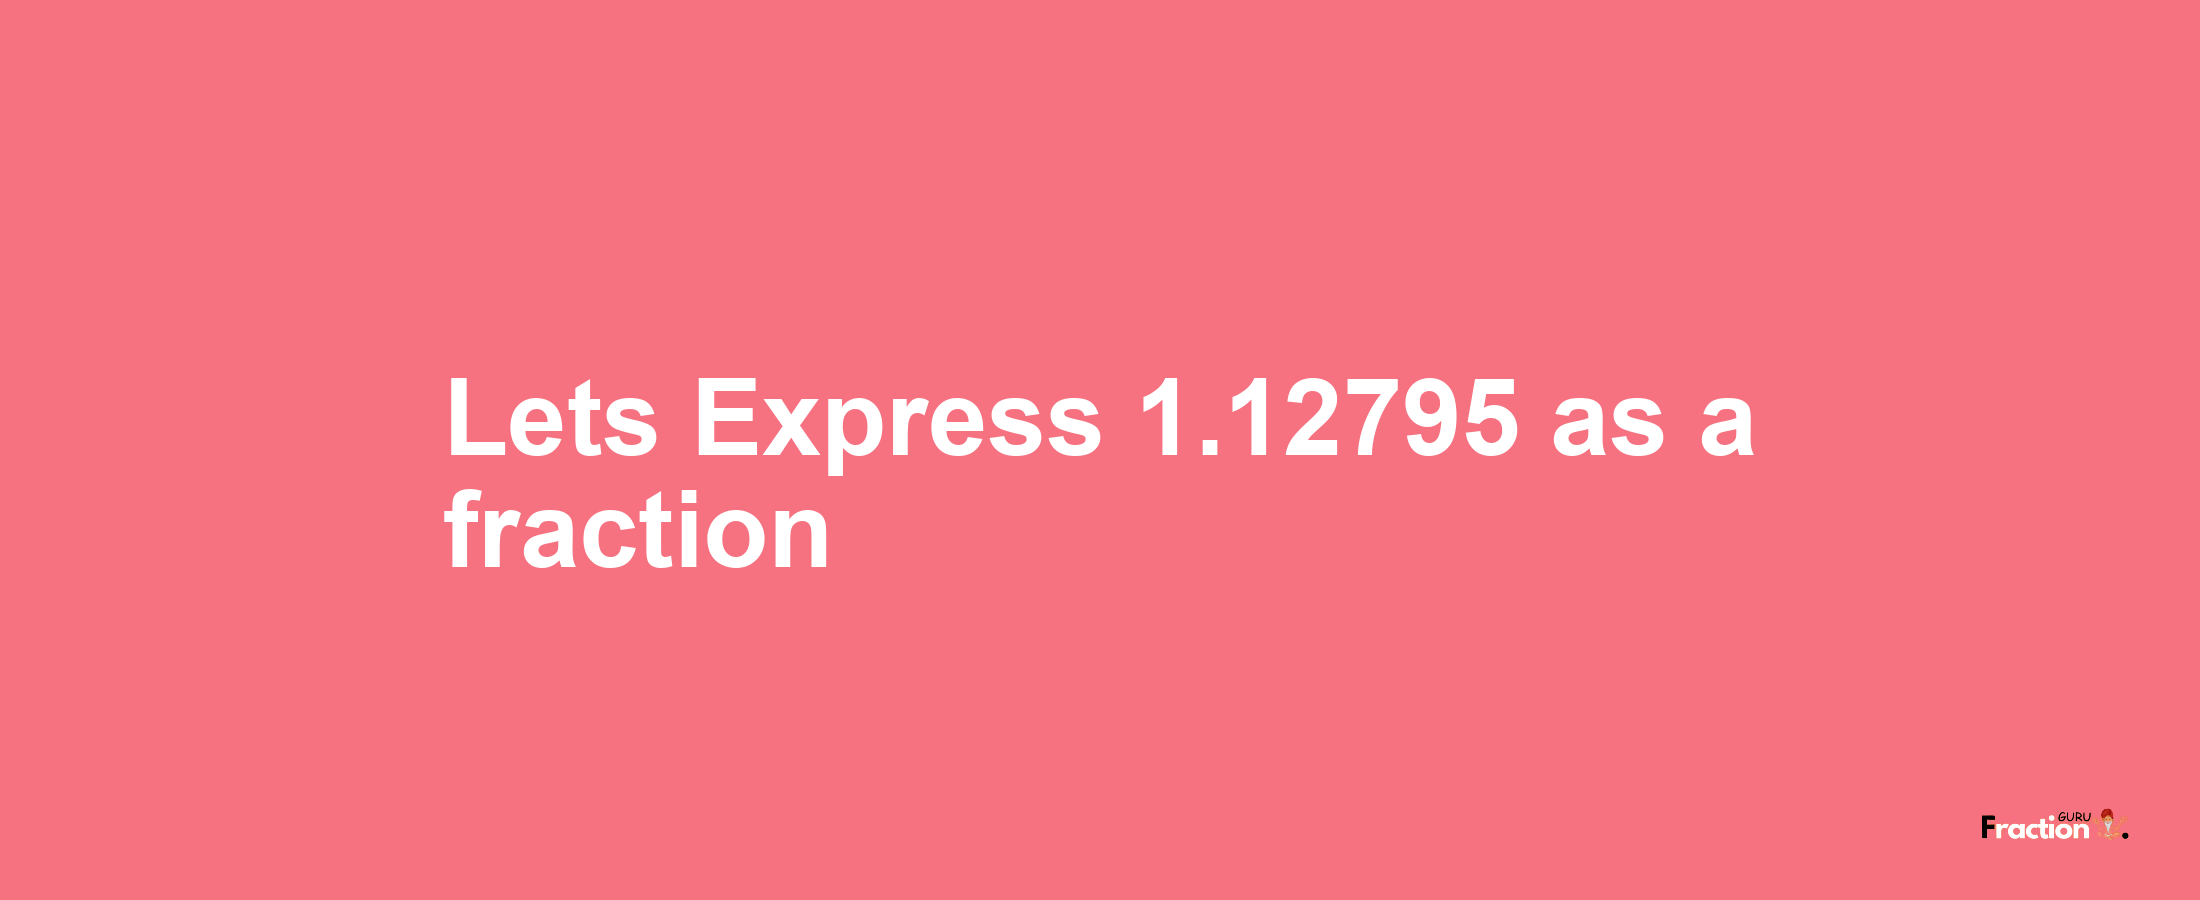 Lets Express 1.12795 as afraction